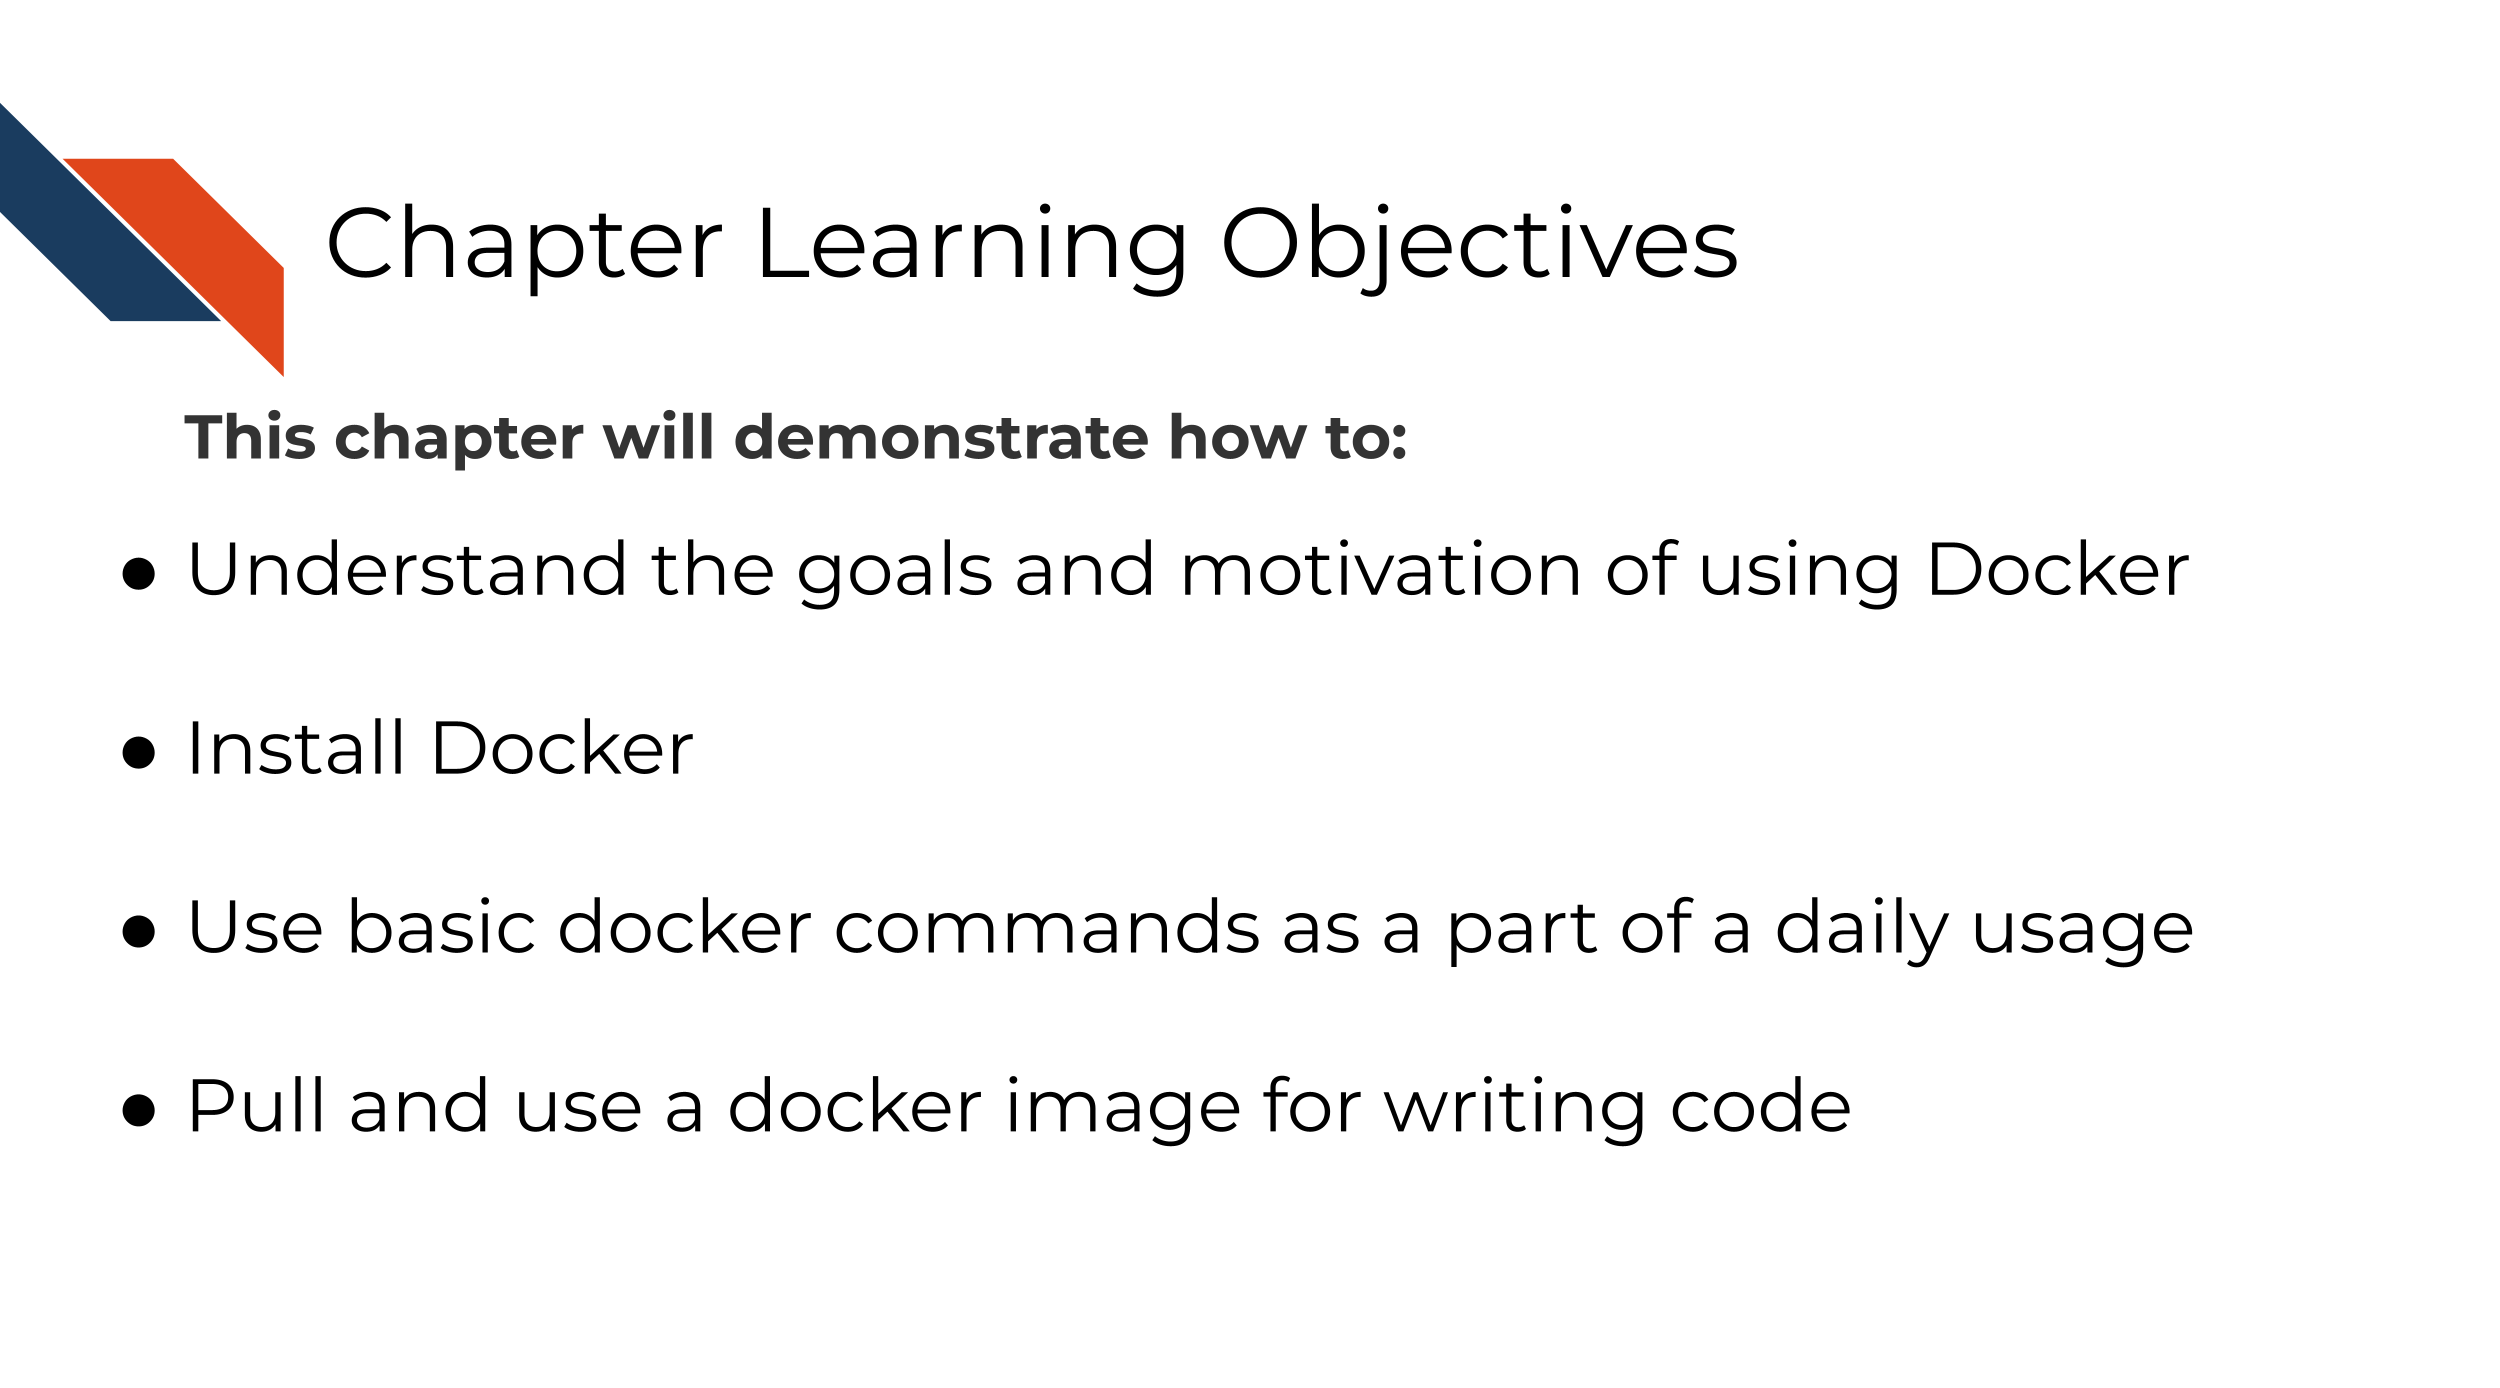 Learning objectives This chapter will demonstrate how to: Understand the goals and motivation of using Docker. Install Docker. Use basic docker commands as a part of a daily usage. Pull and use a docker image for writing code.